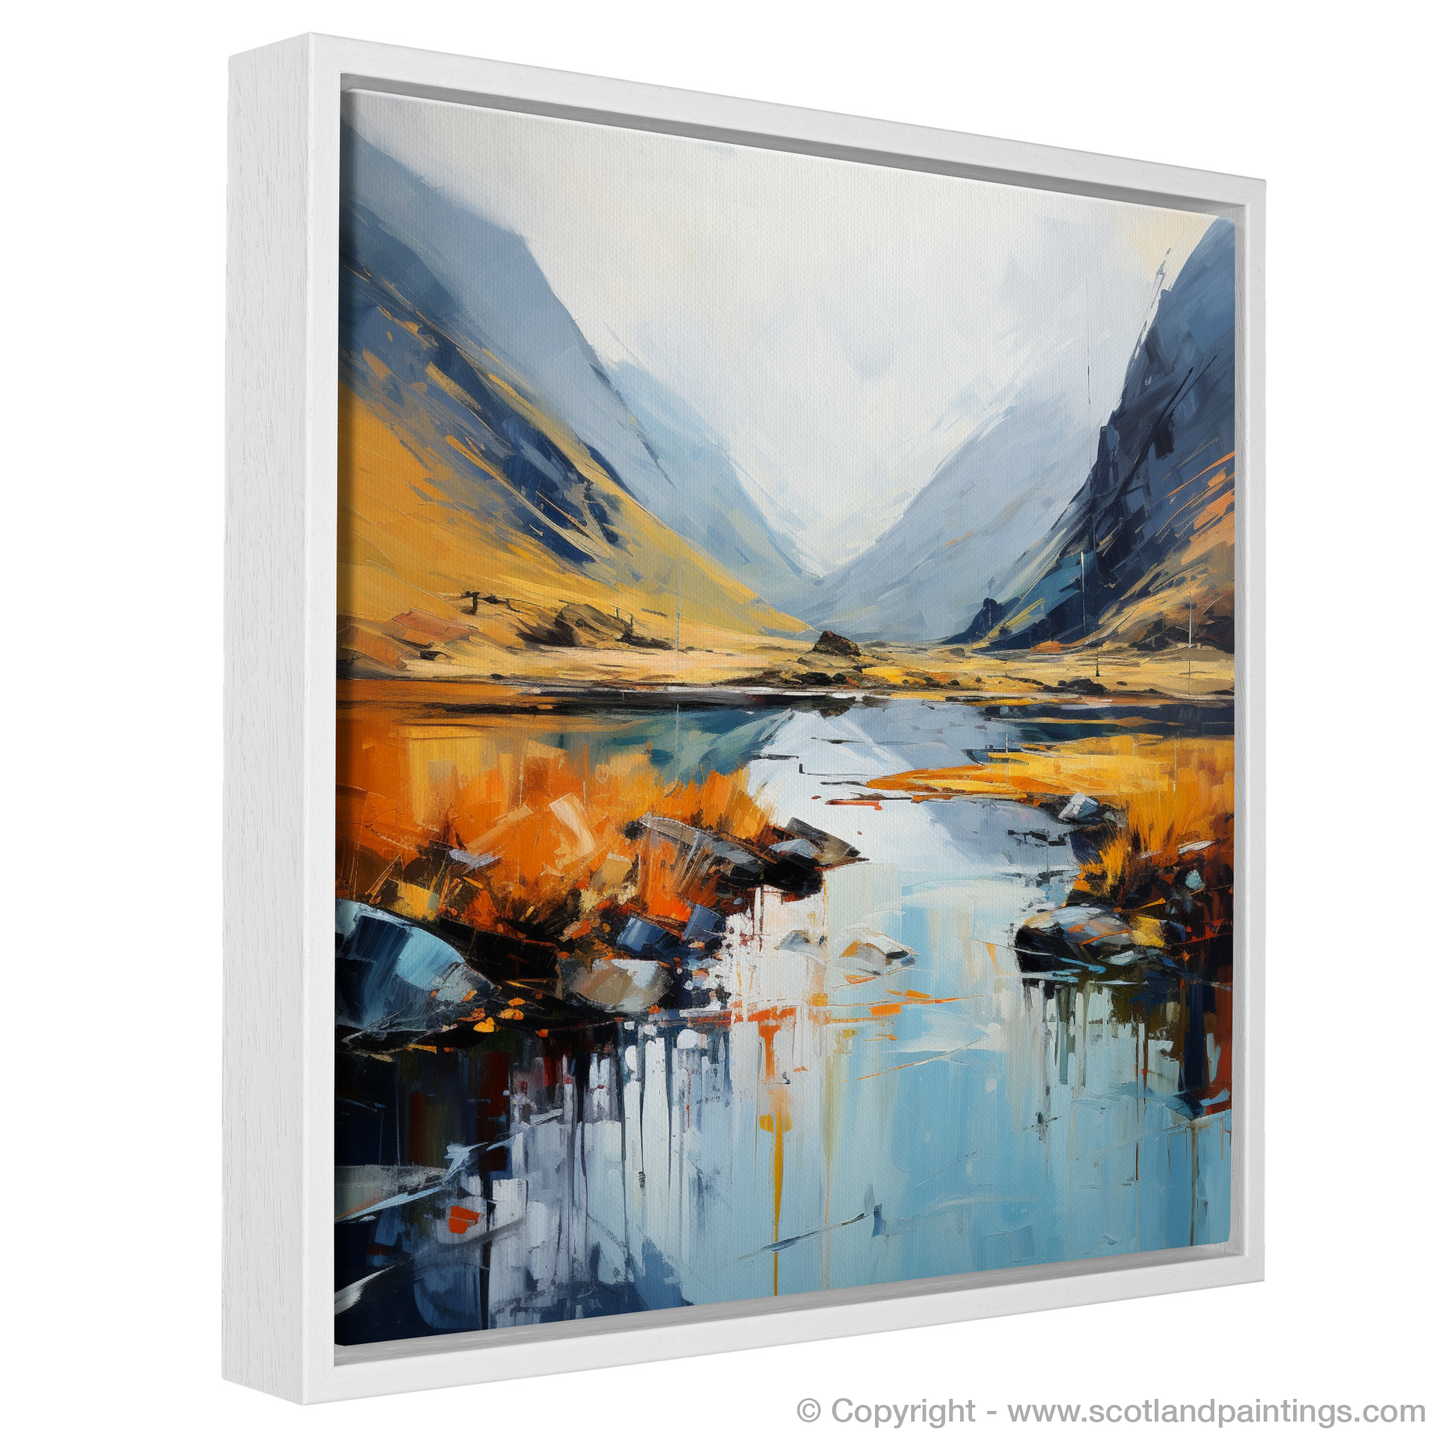 Highland Reverie: An Abstract Ode to Glen Coe